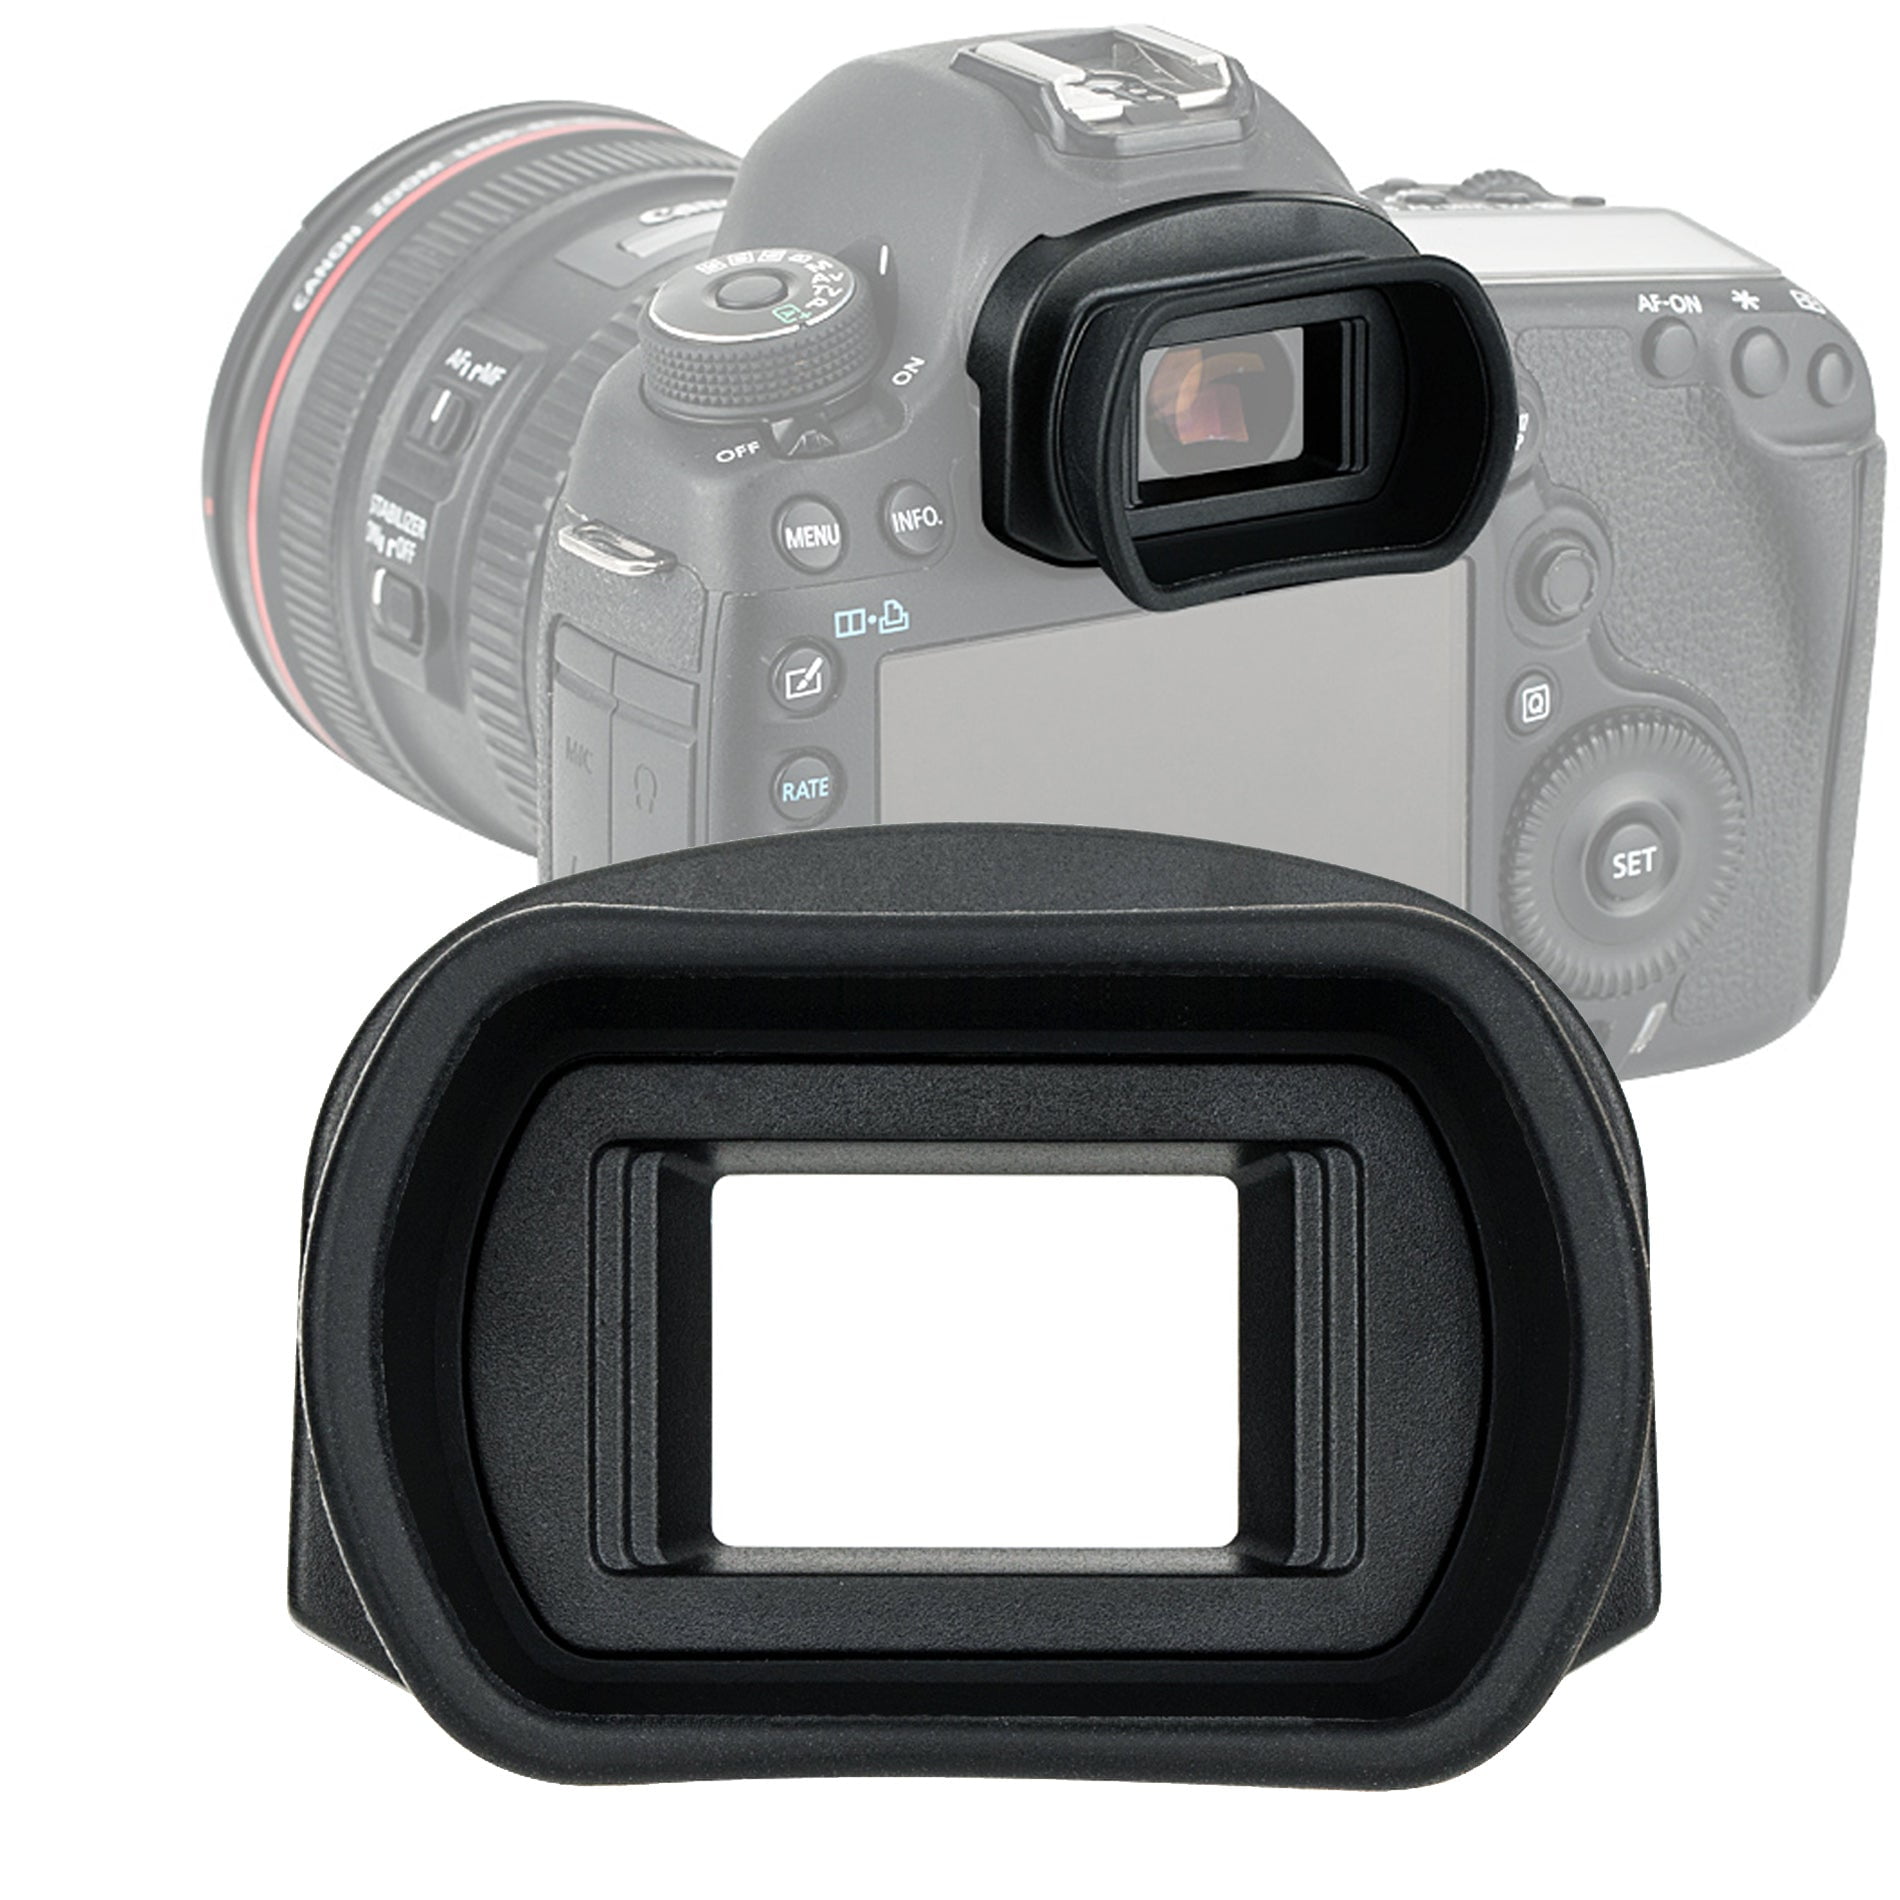 Used to Protect Your Camera from Dust or Other Dirts MagiDeal Camera Eyecup Viewfinder Eyepiece Hot Shoe Cover for Canon EOS 77D/200D/800D/1300D/1500D